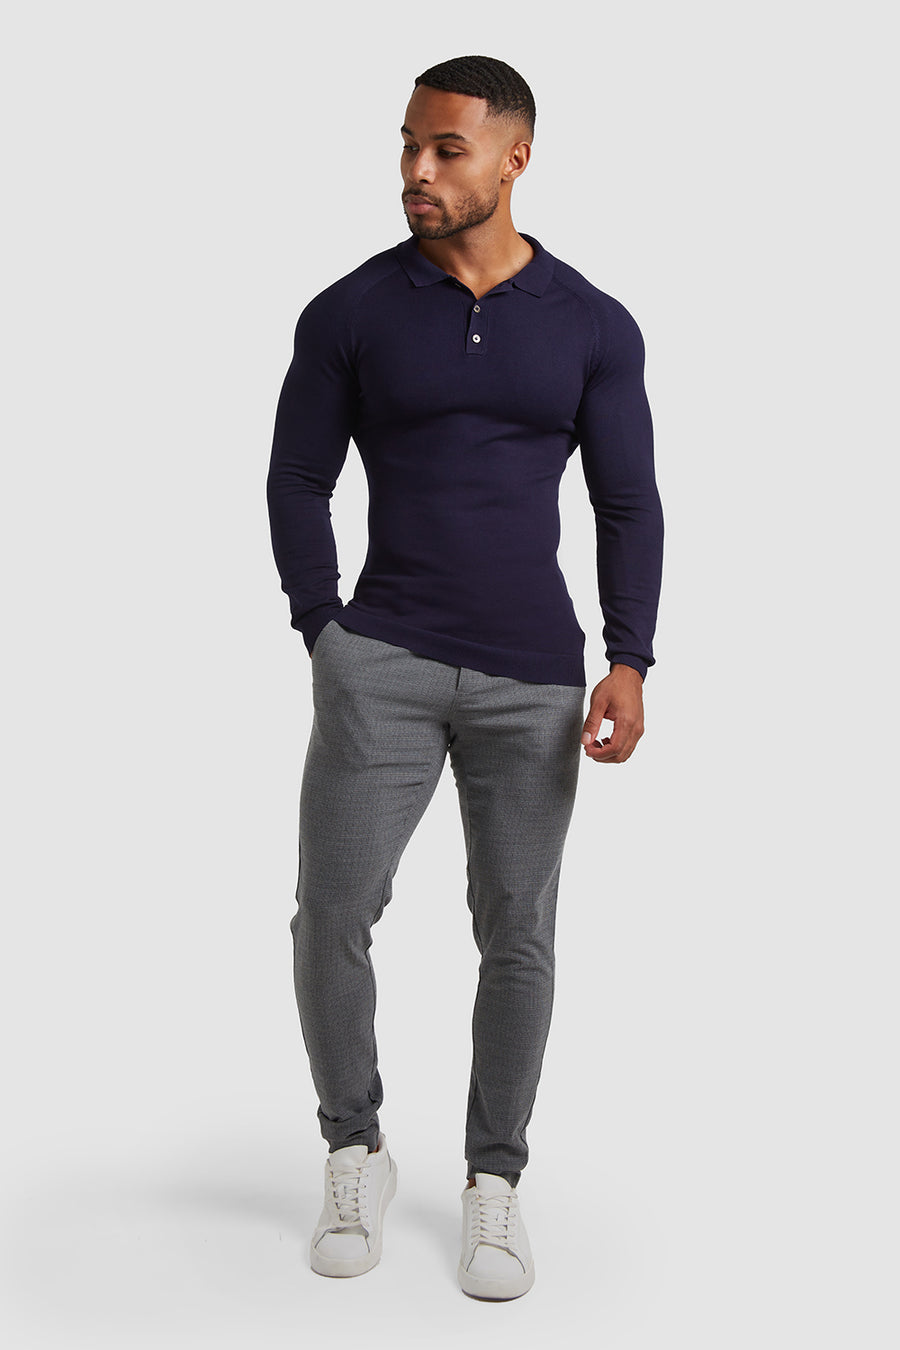 Knit Polo Shirt Long Sleeve in Navy - TAILORED ATHLETE - USA